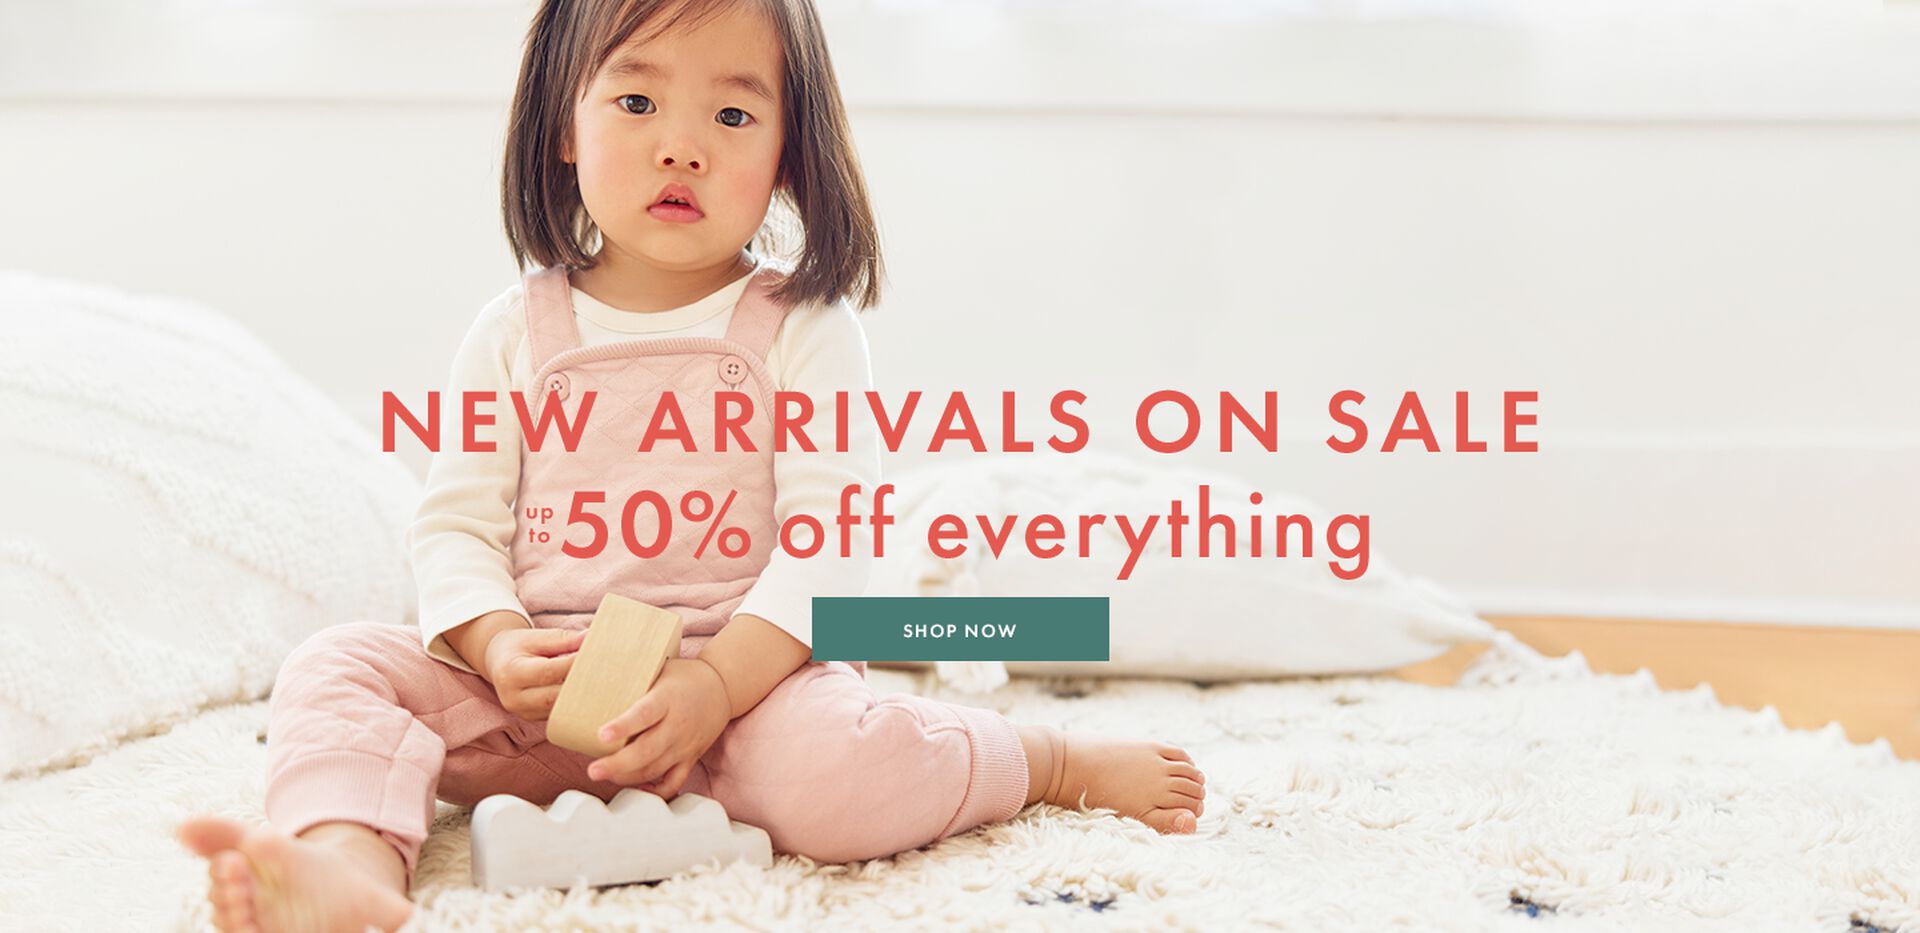 New Arrivals on Sale. Up to 50% off Everything